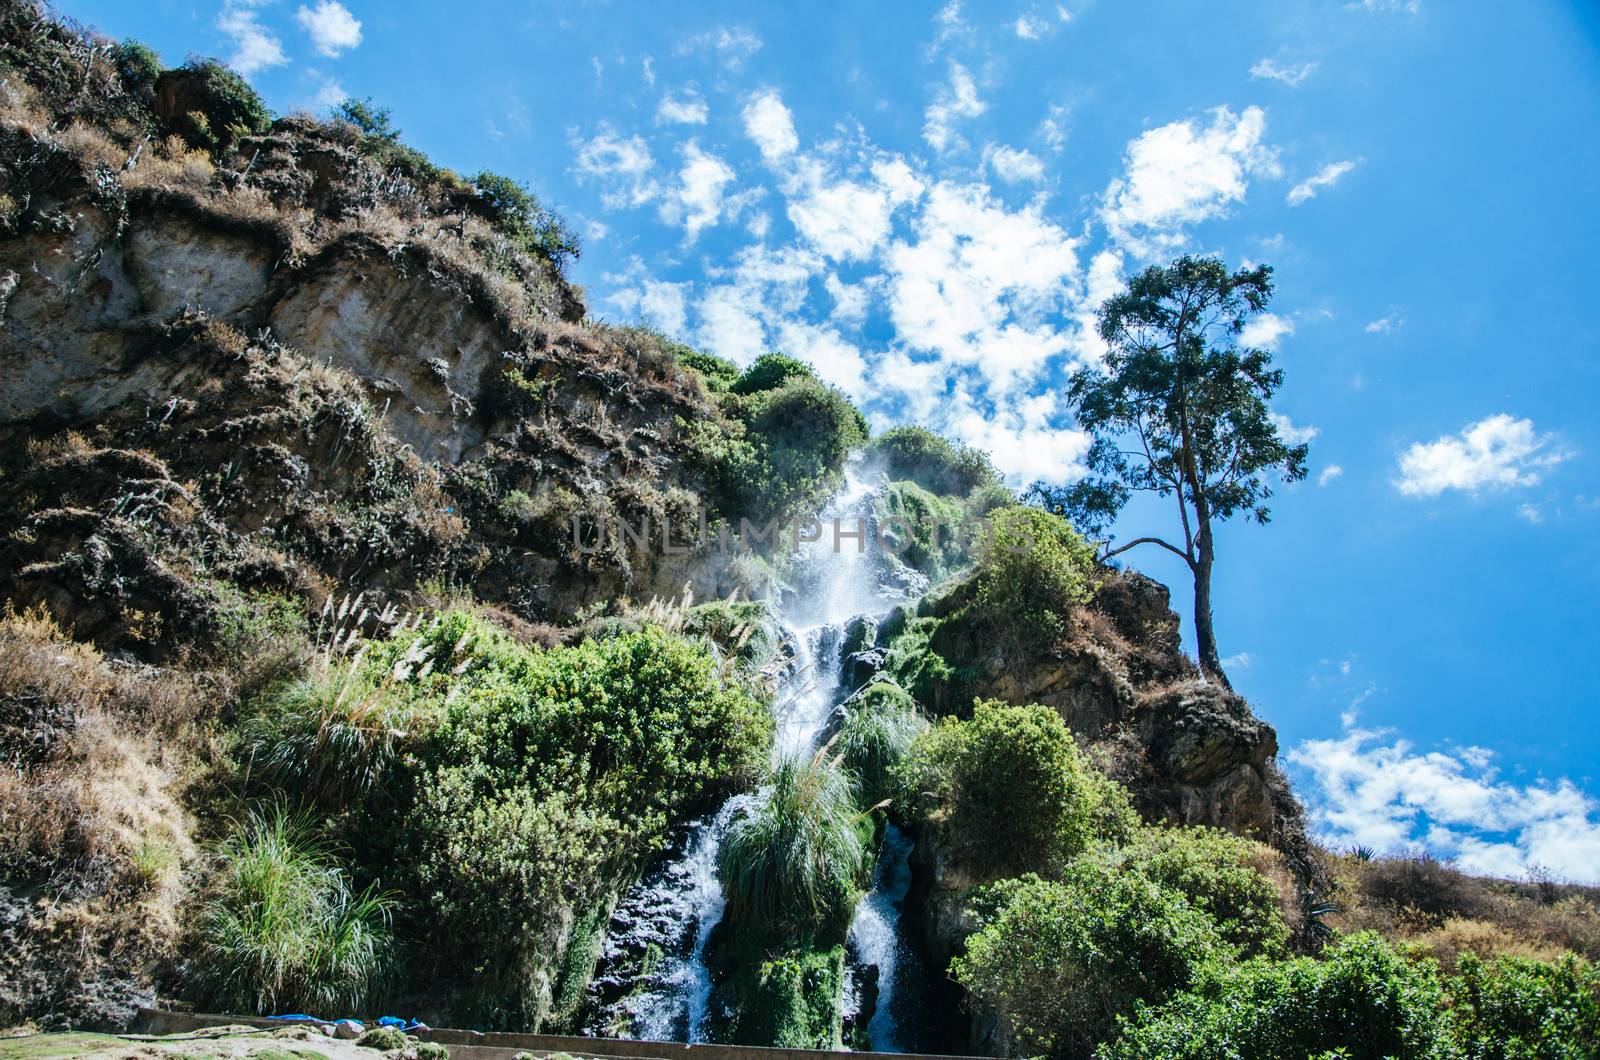 Waterfall in Obrajillo located in the province of Canta is located 3 hours from Lima and is an ideal destination for nature lovers